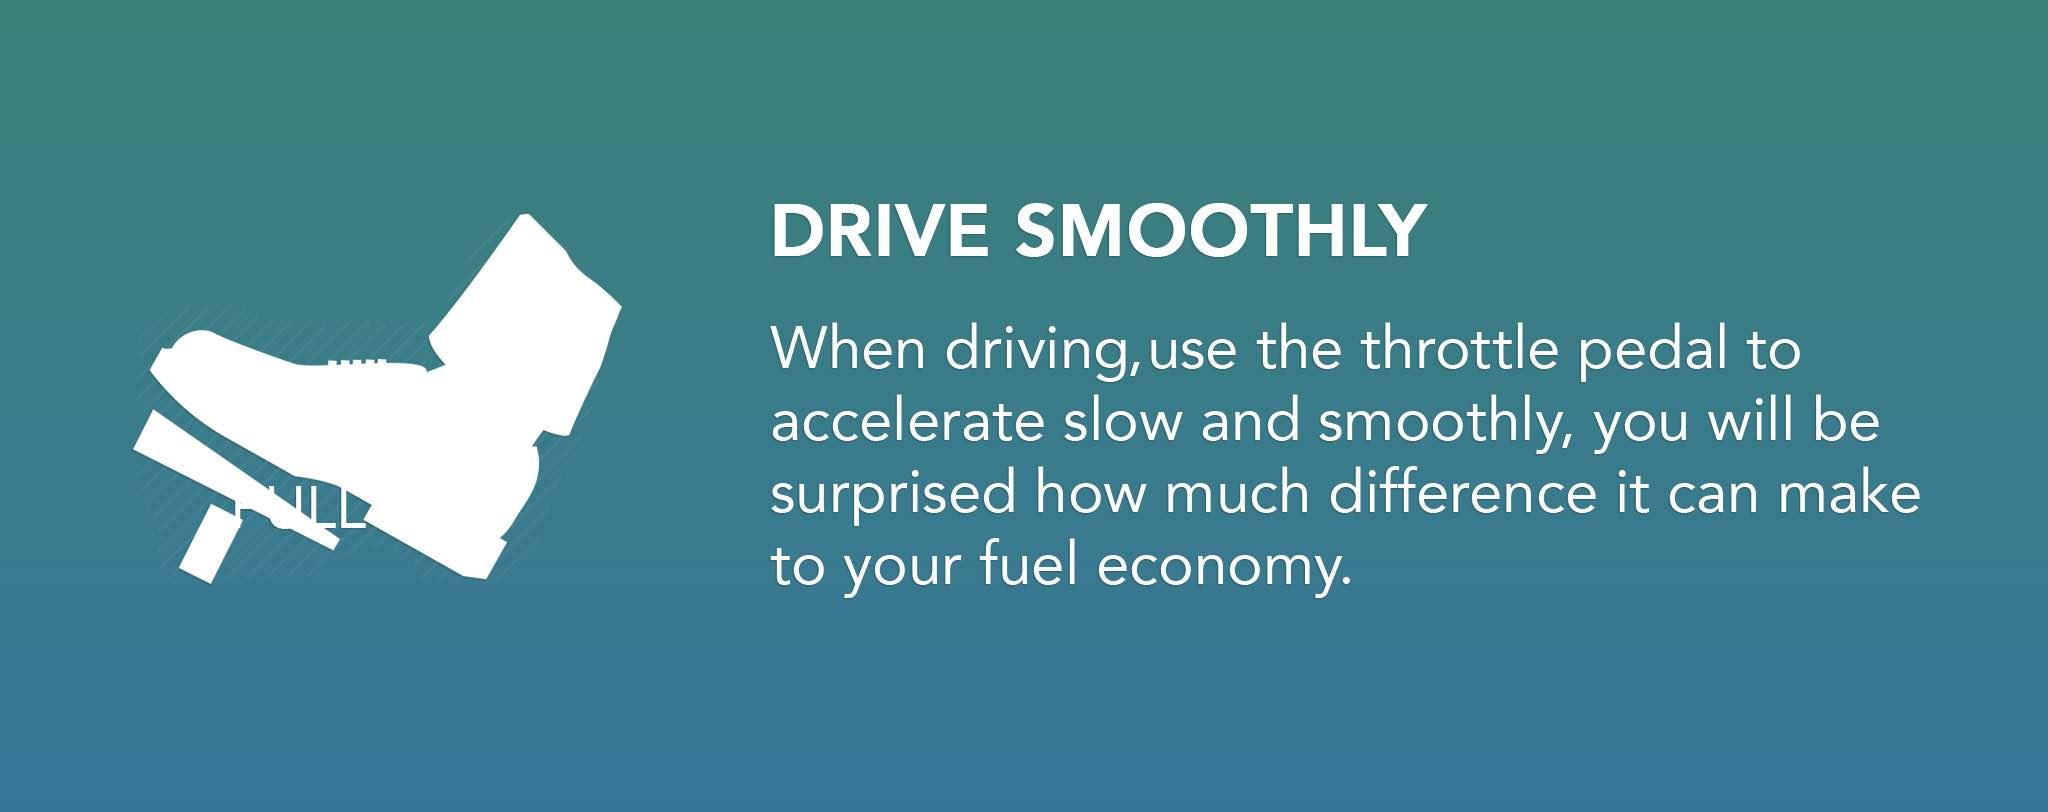 When driving use the throttle pedal to accelerate slow and smoothly, you will be surprised how much difference it can make to your fuel economy.